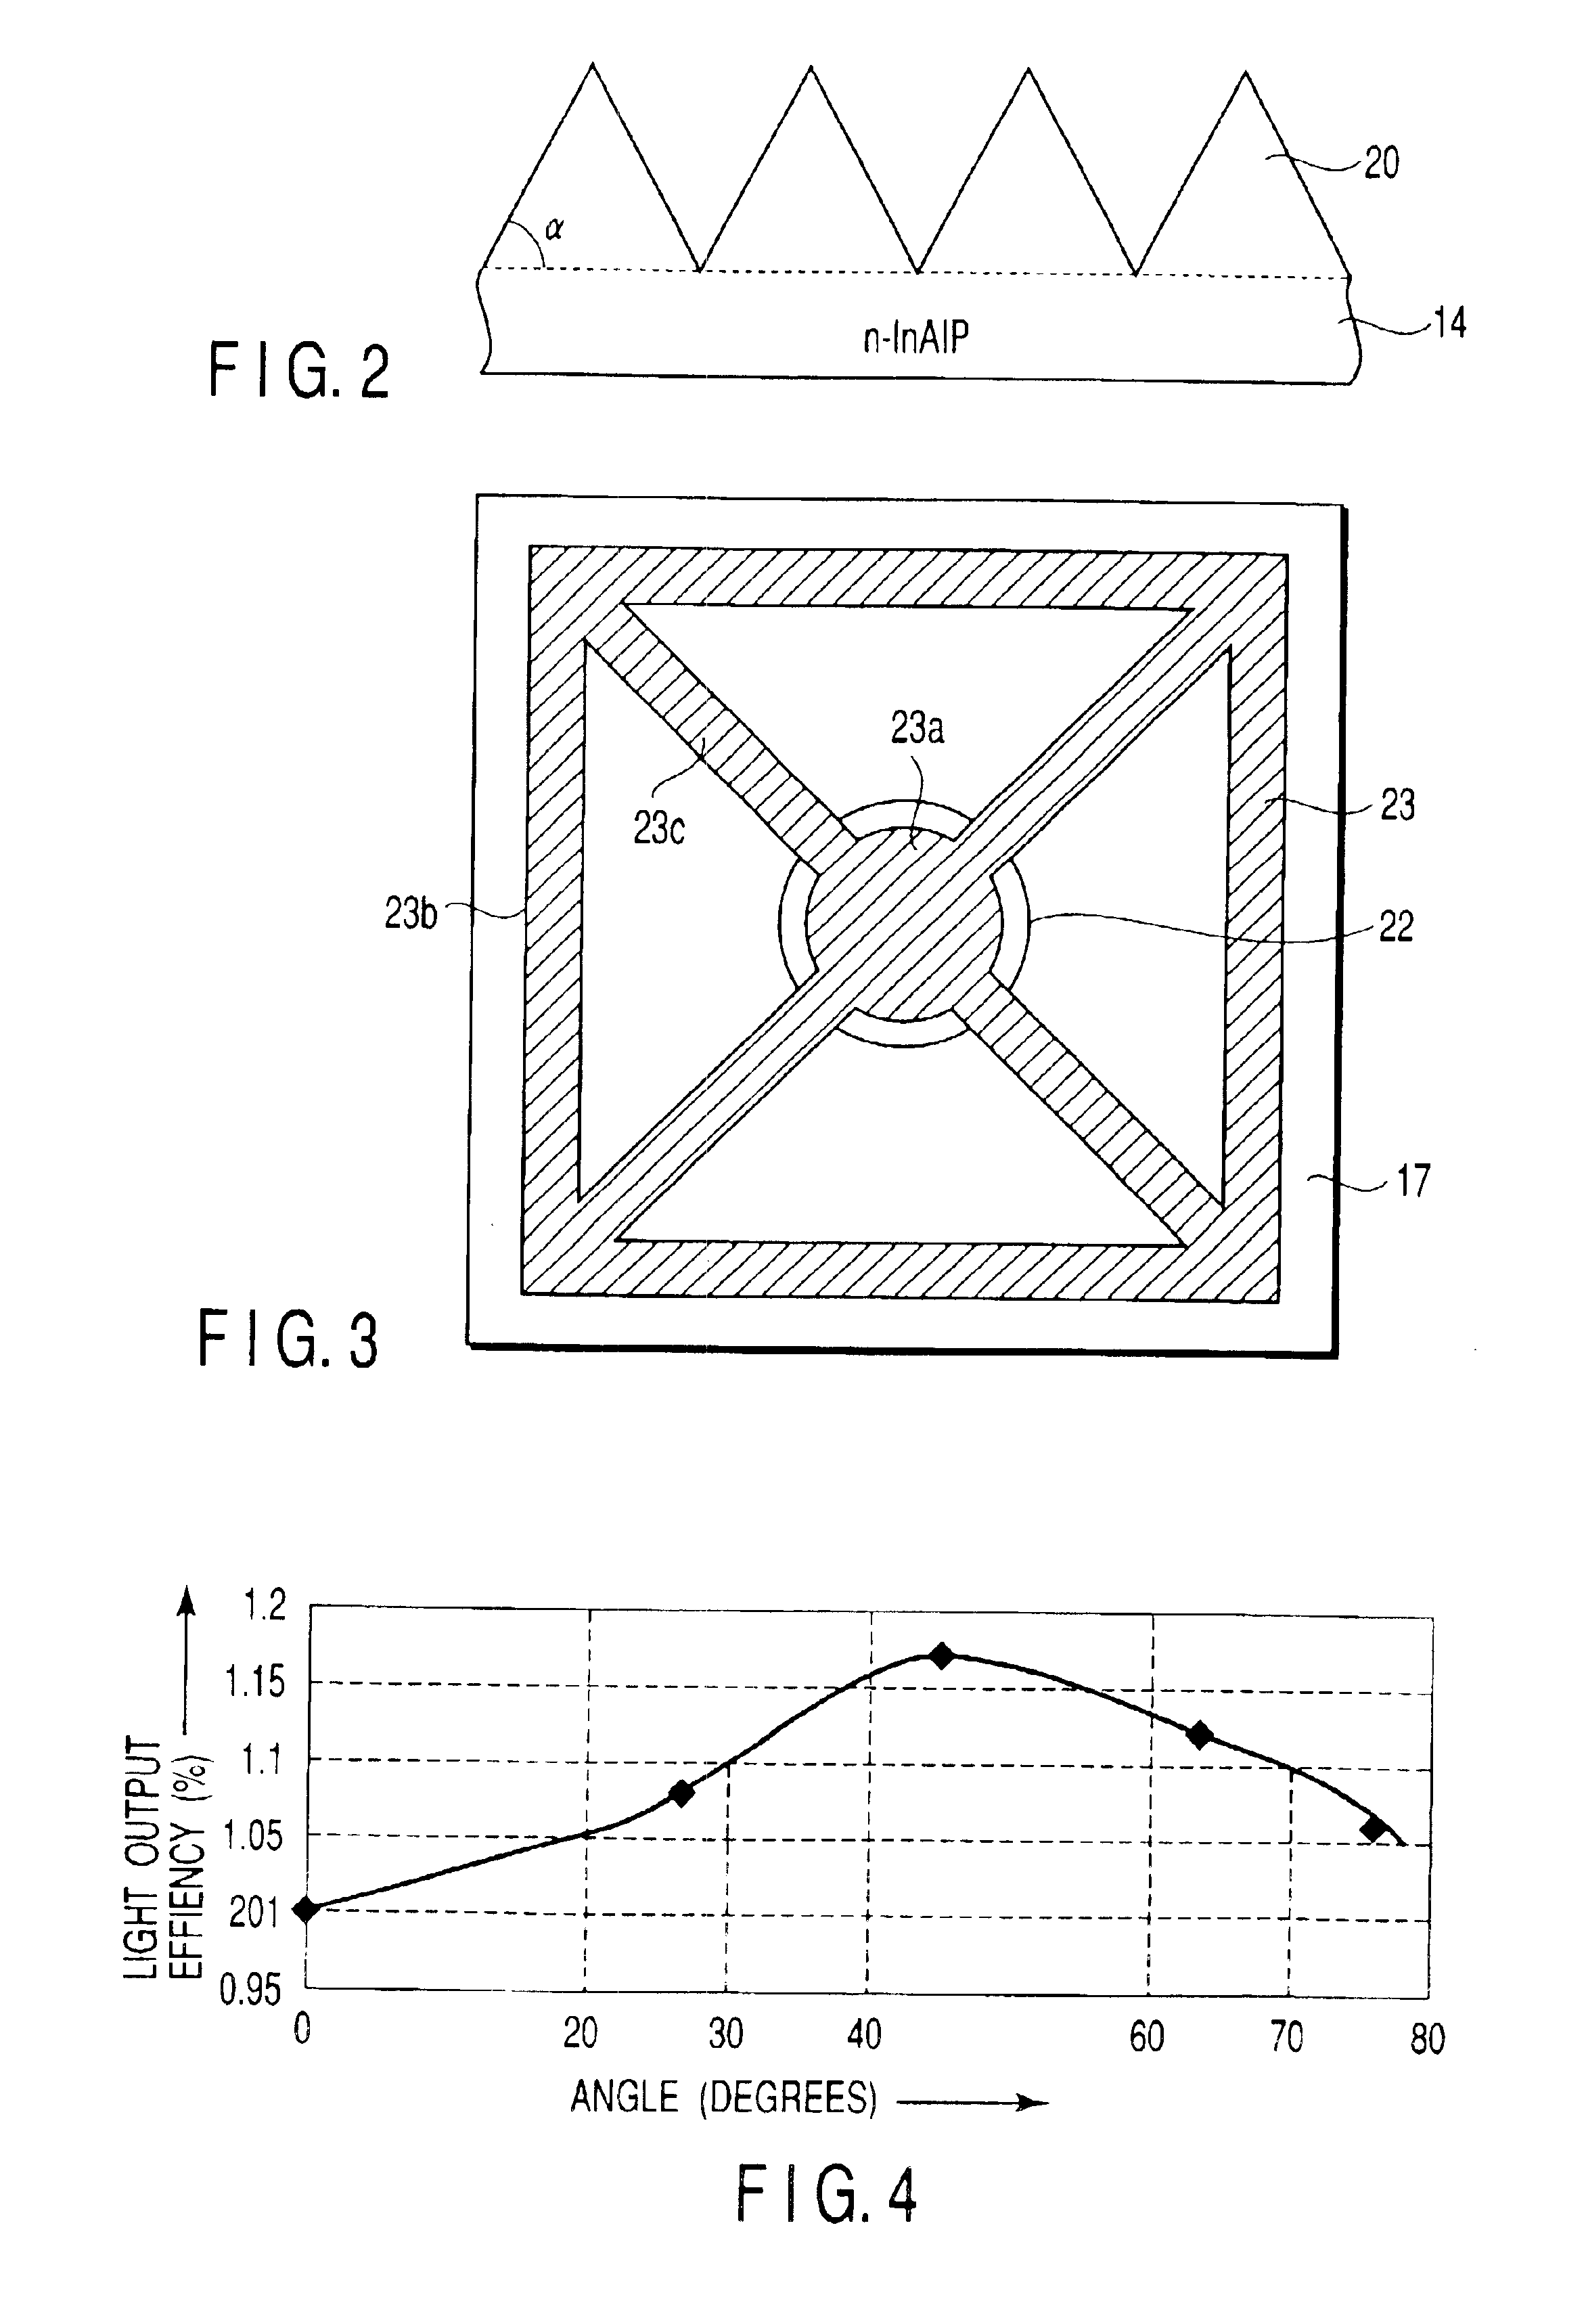 Surface-emitting semiconductor light device